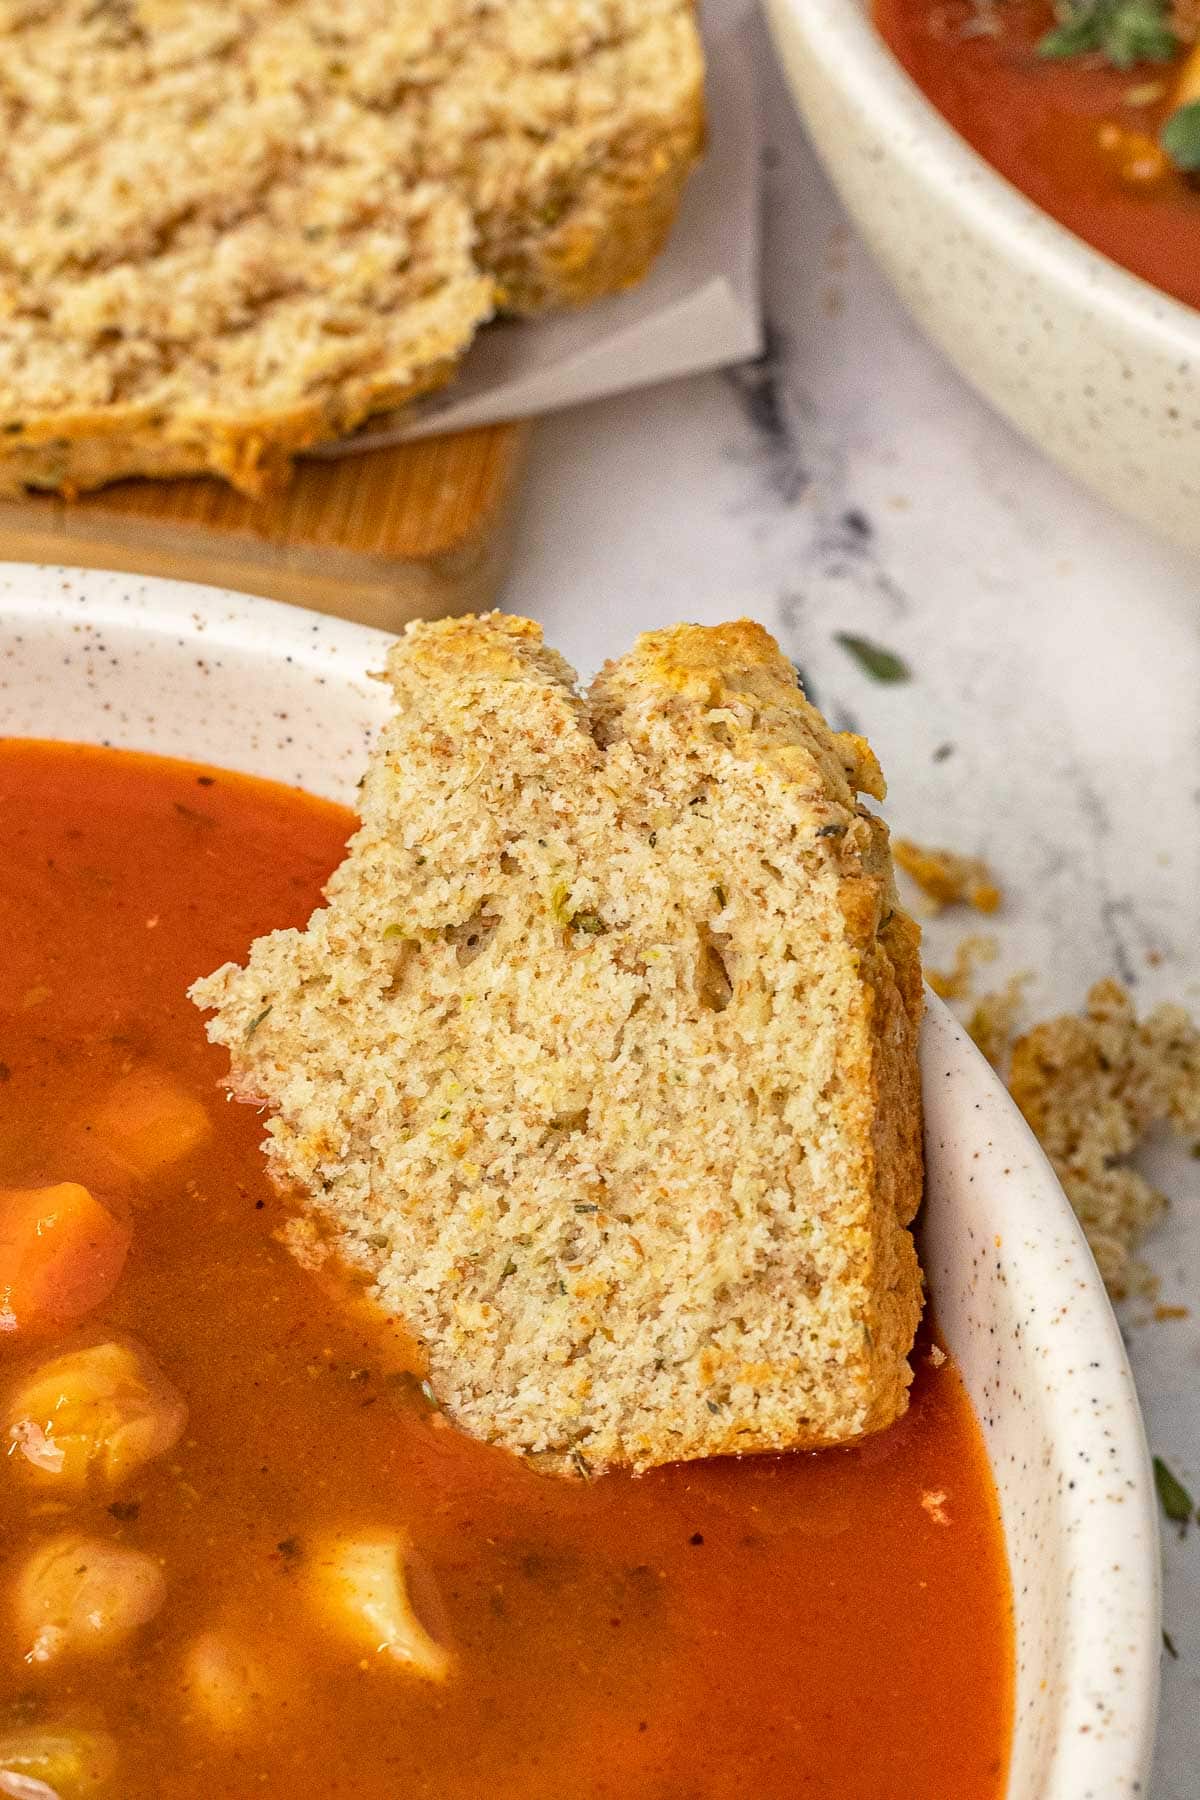 Herb Quick Bread baked bread slices and tomato soup